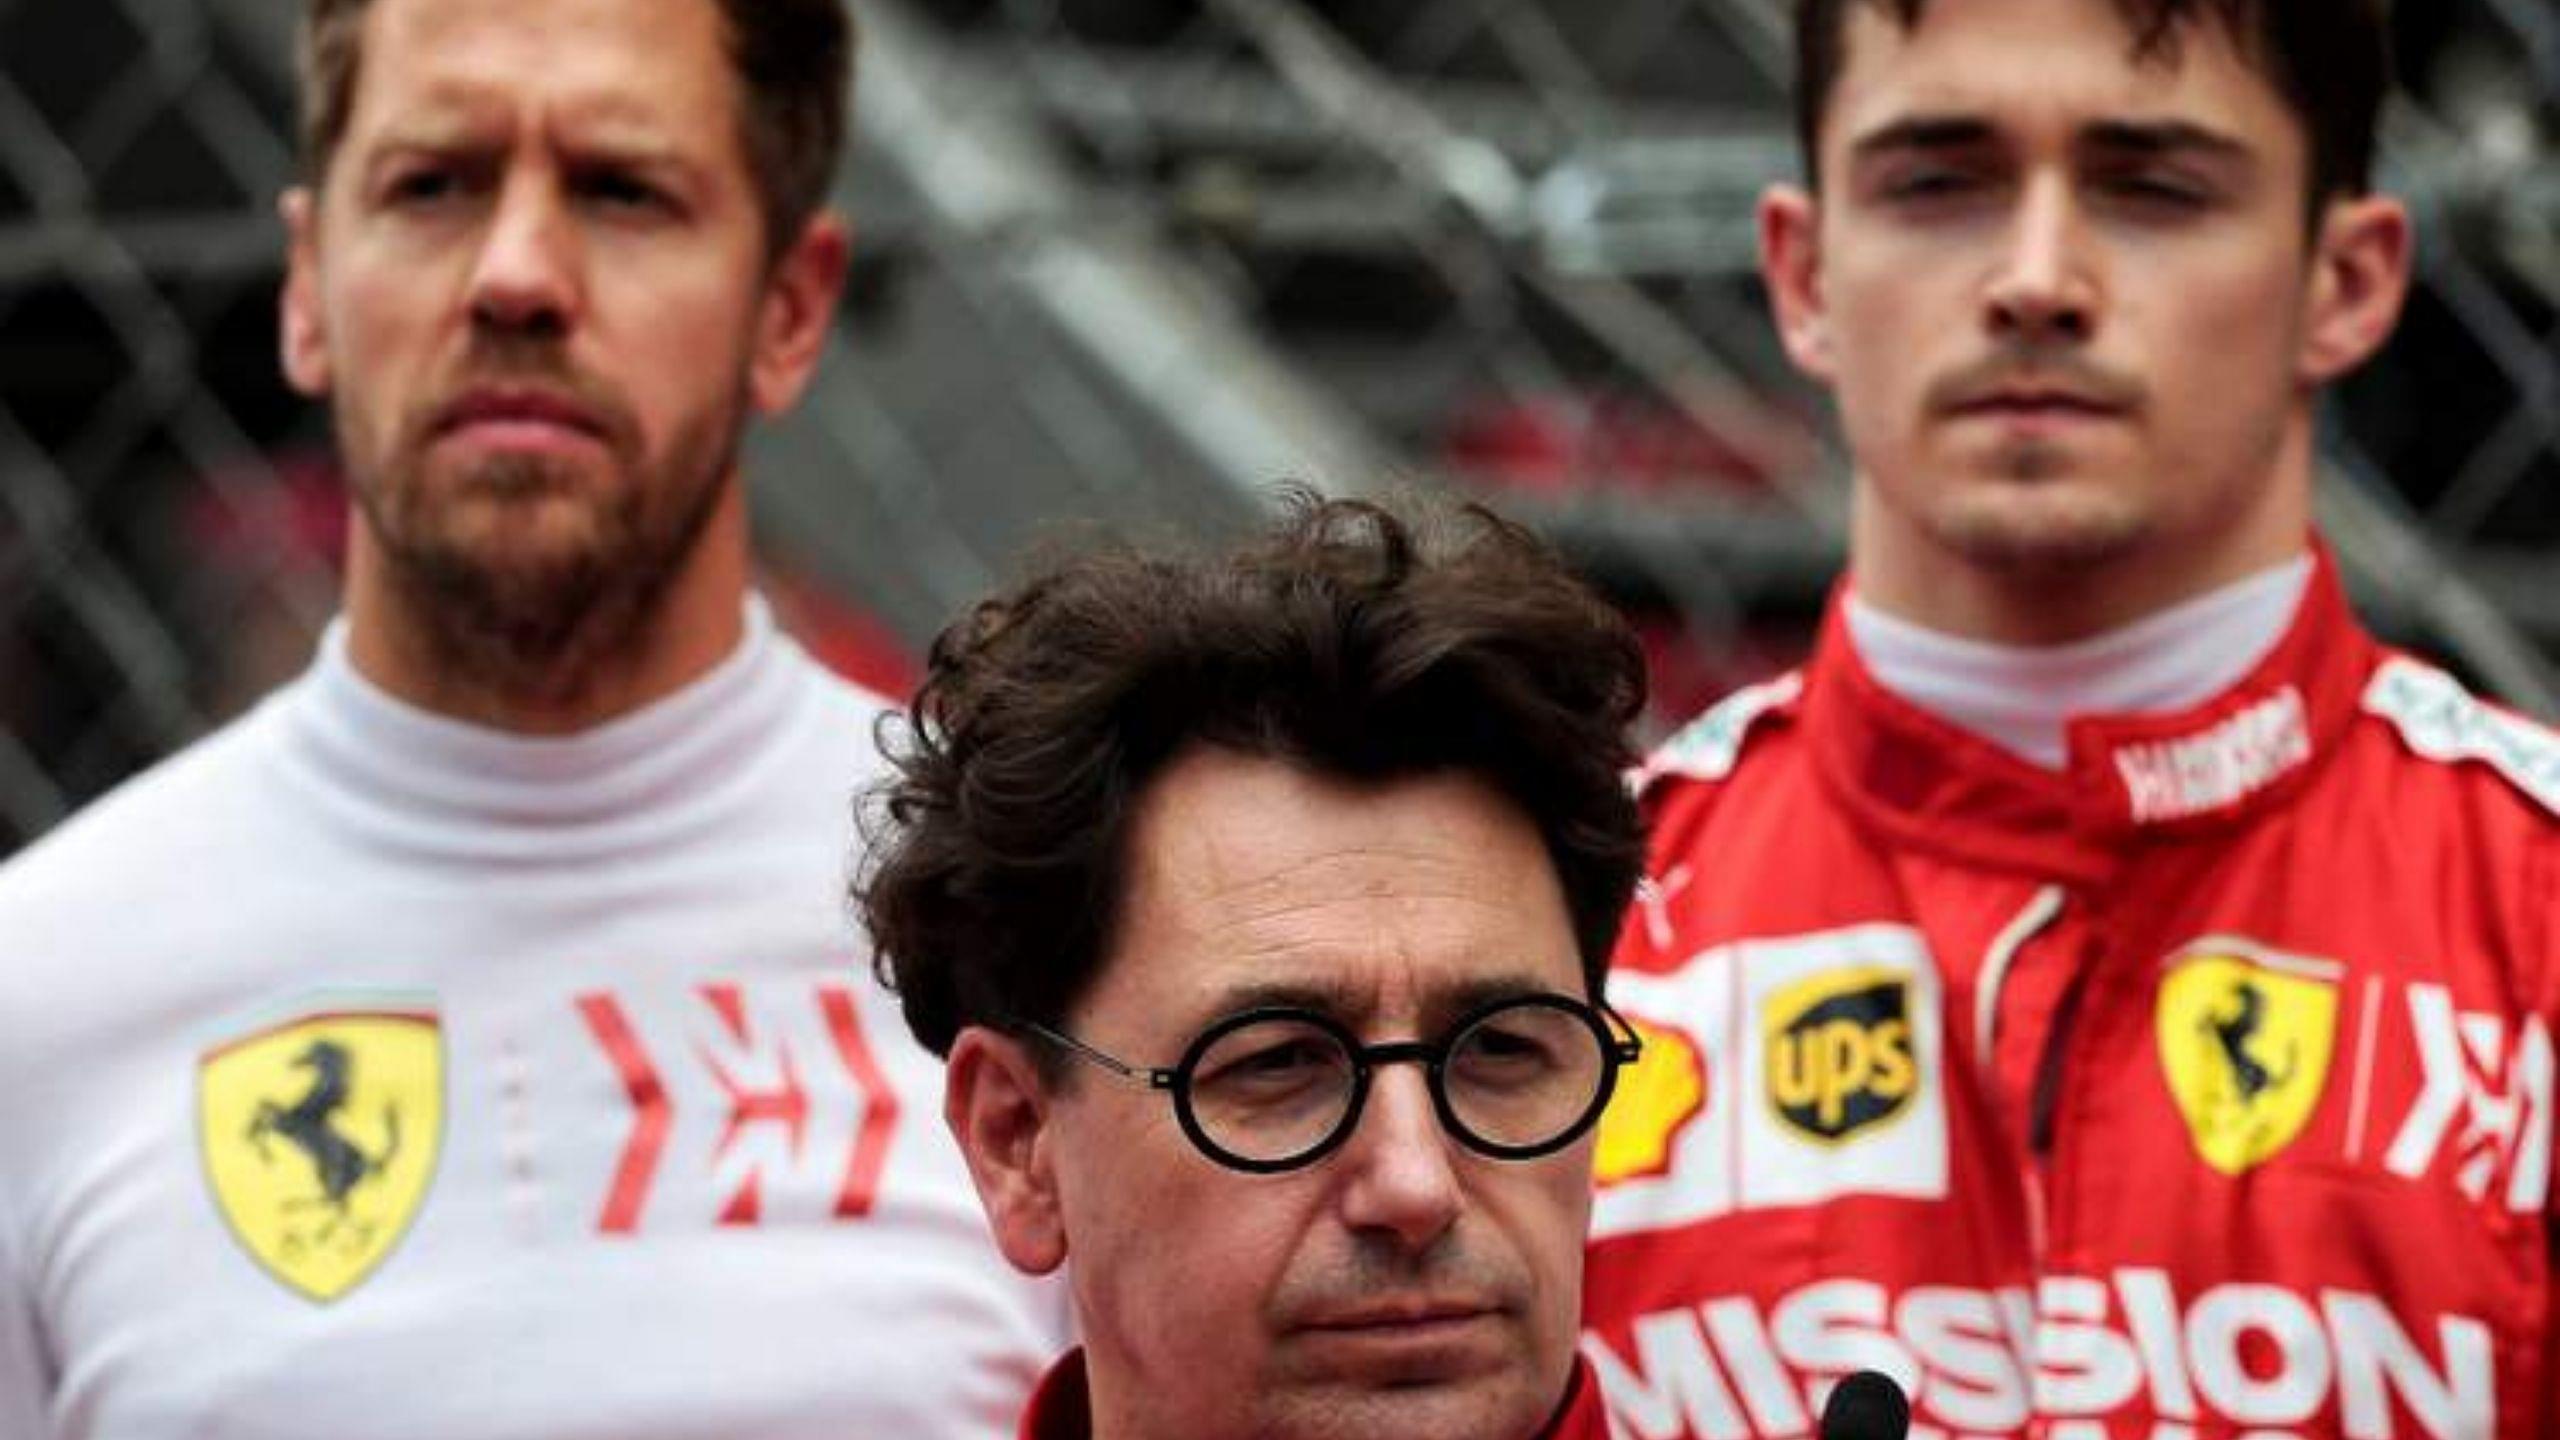 "It's up to Binotto to turn the tide and reverse the downward spiral" - Ferrari F1 boss urged to get iconic team back to winning ways